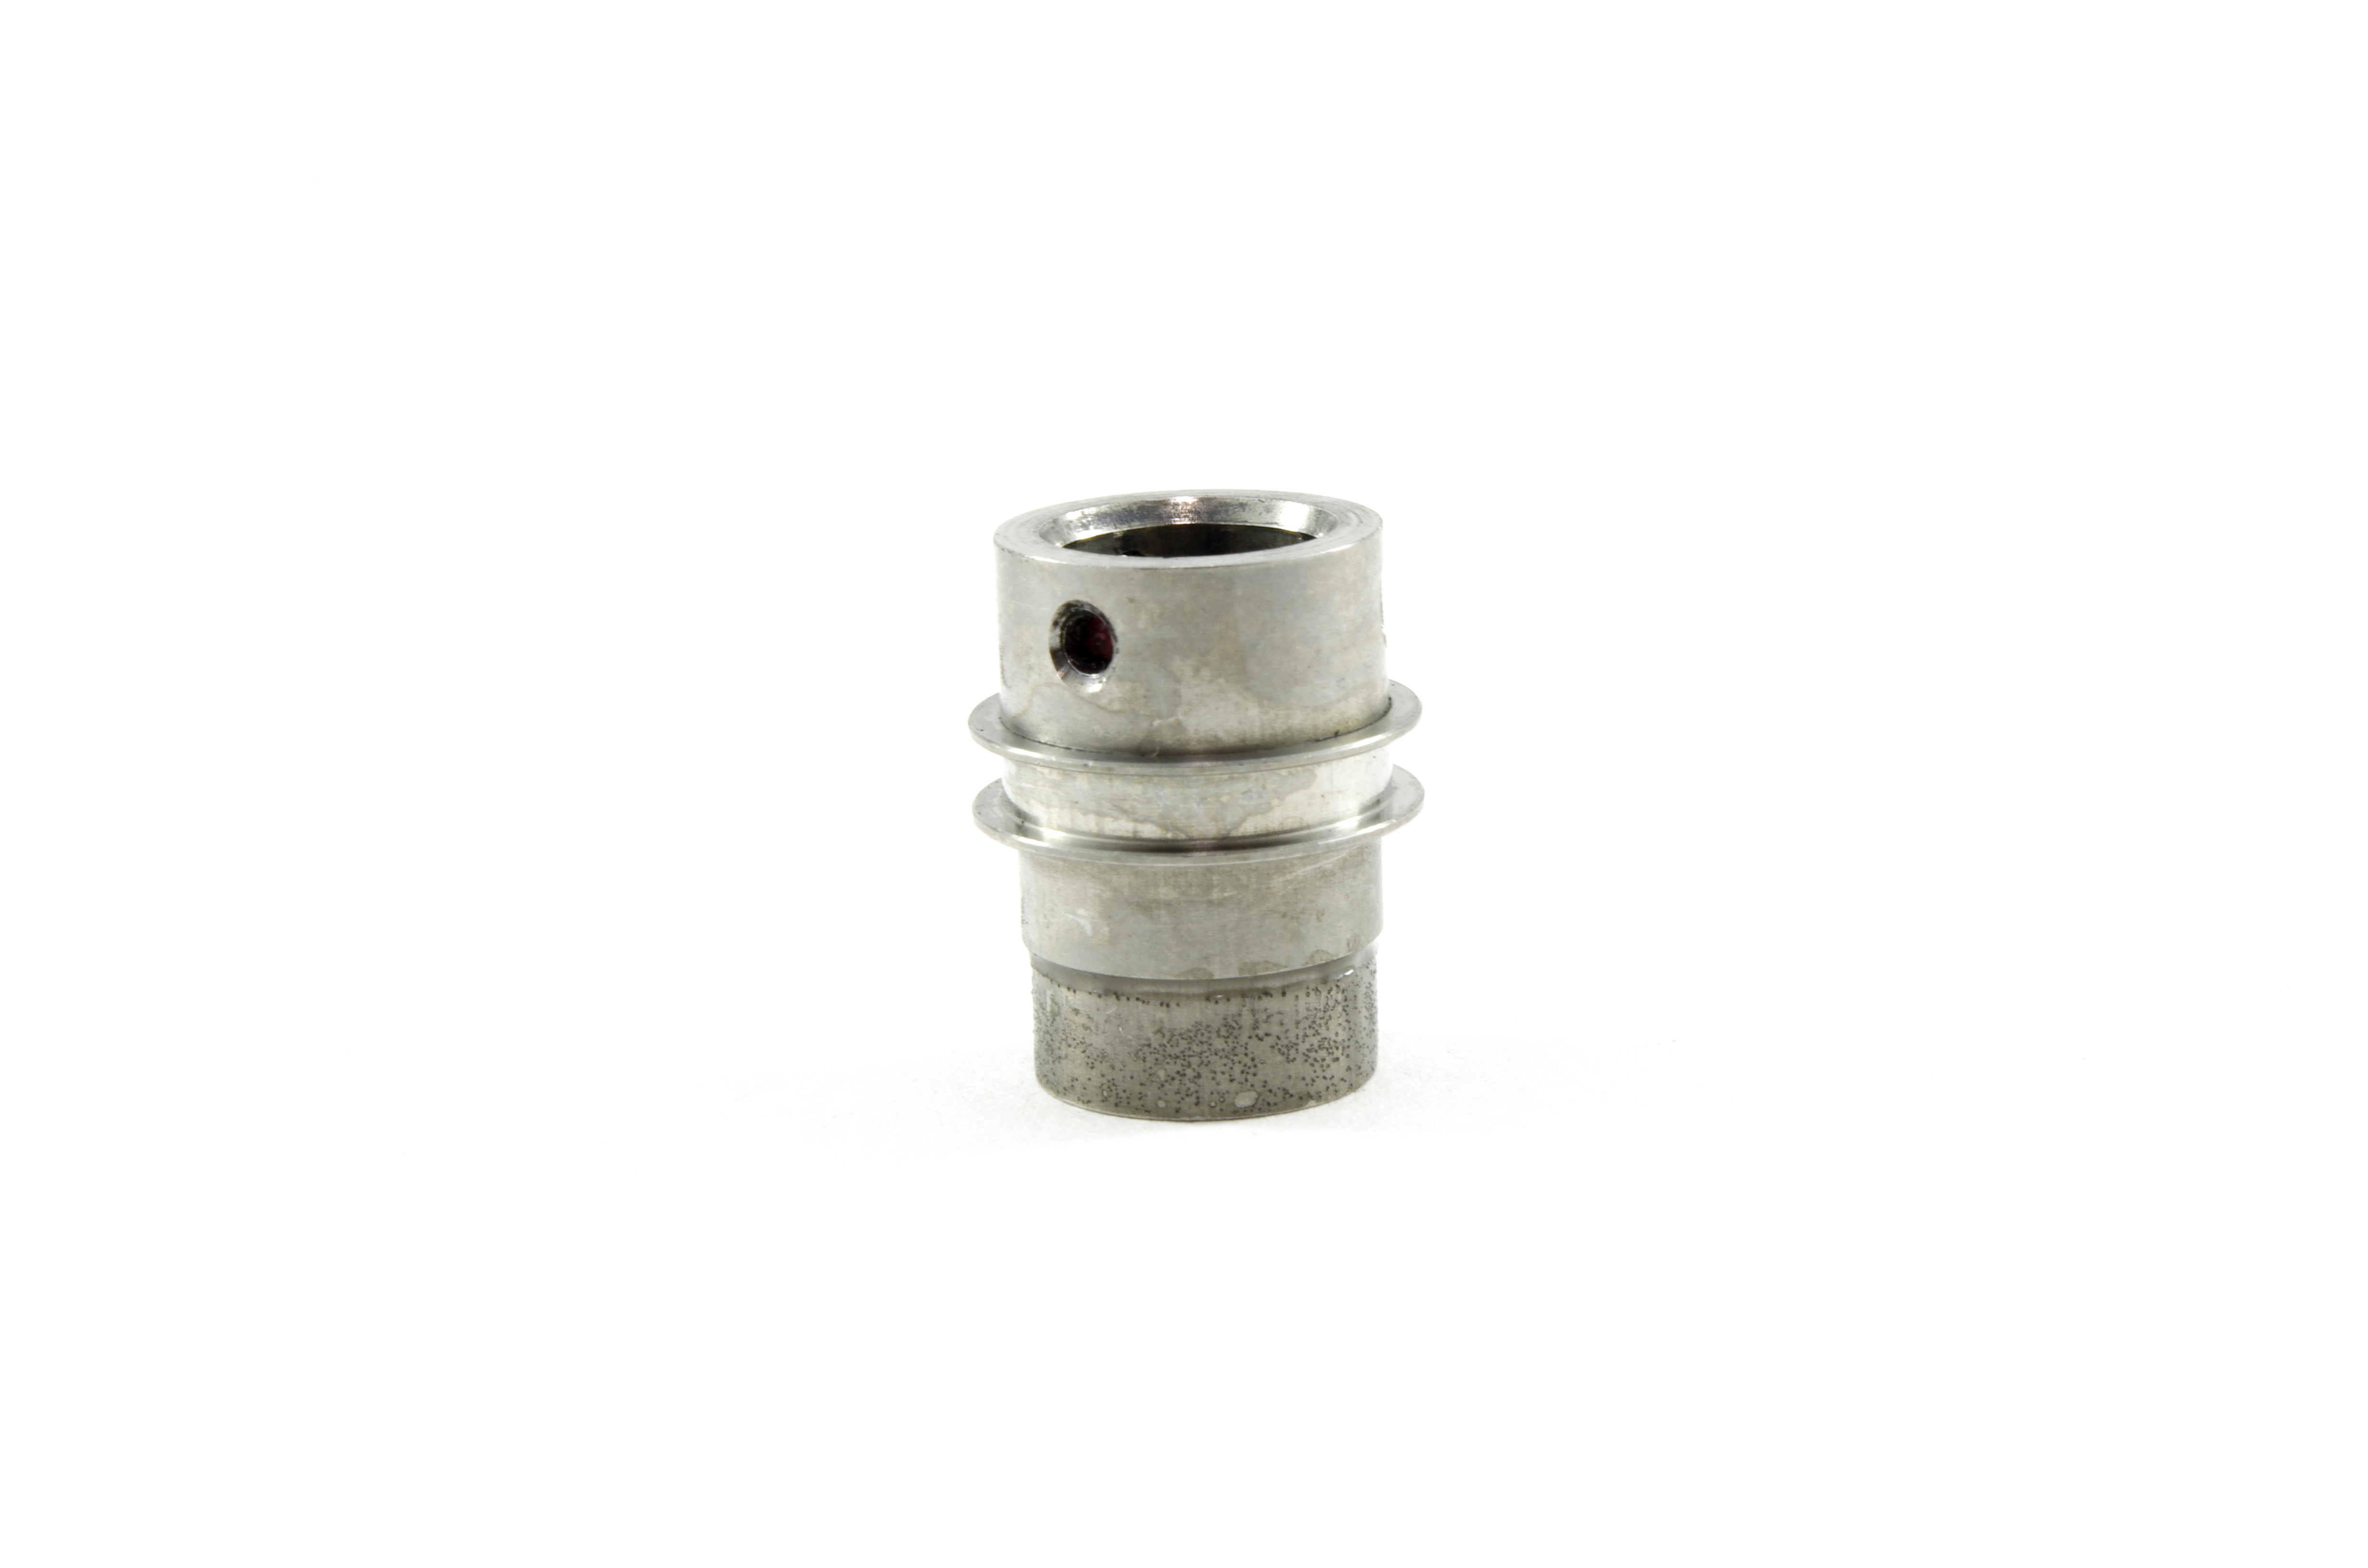 OEM Insertion Tube Proximal End Fitting - GIF-160